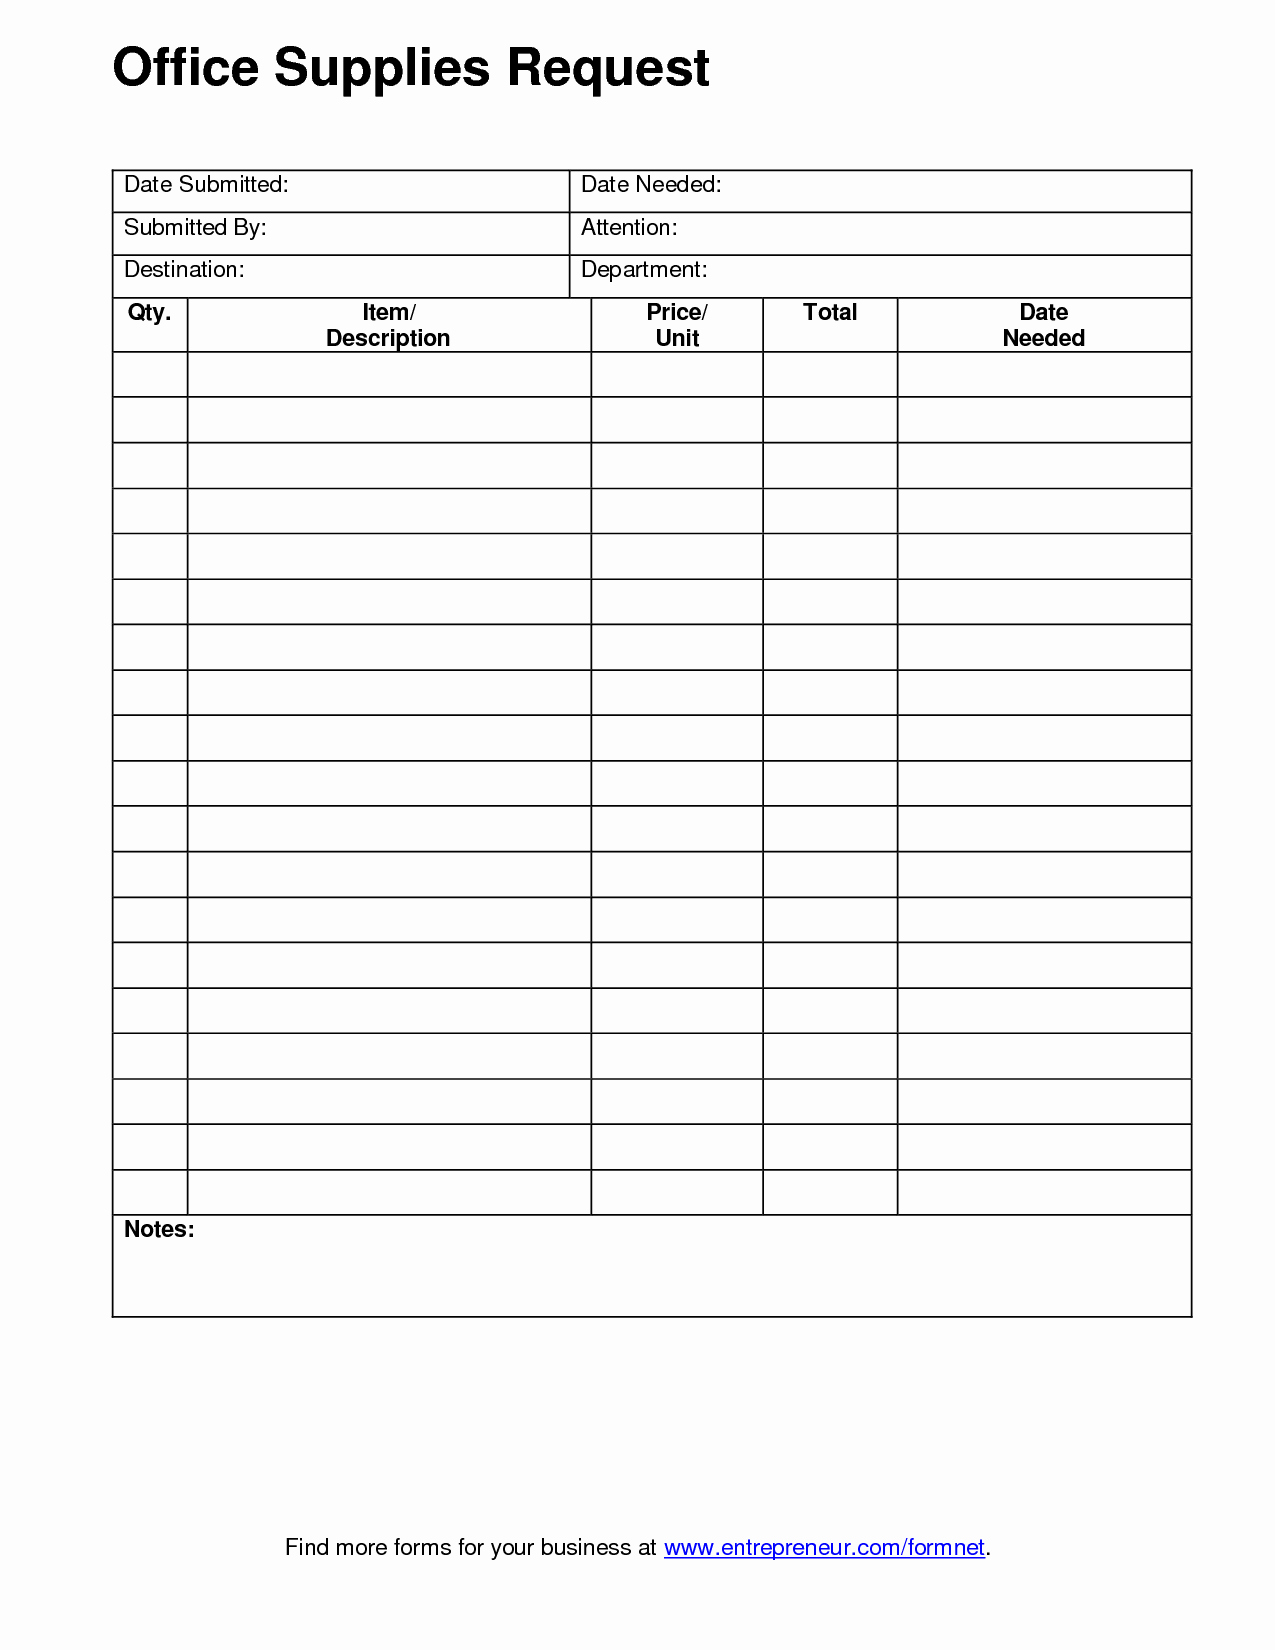 Supplies order form New Fice Supply order form Template